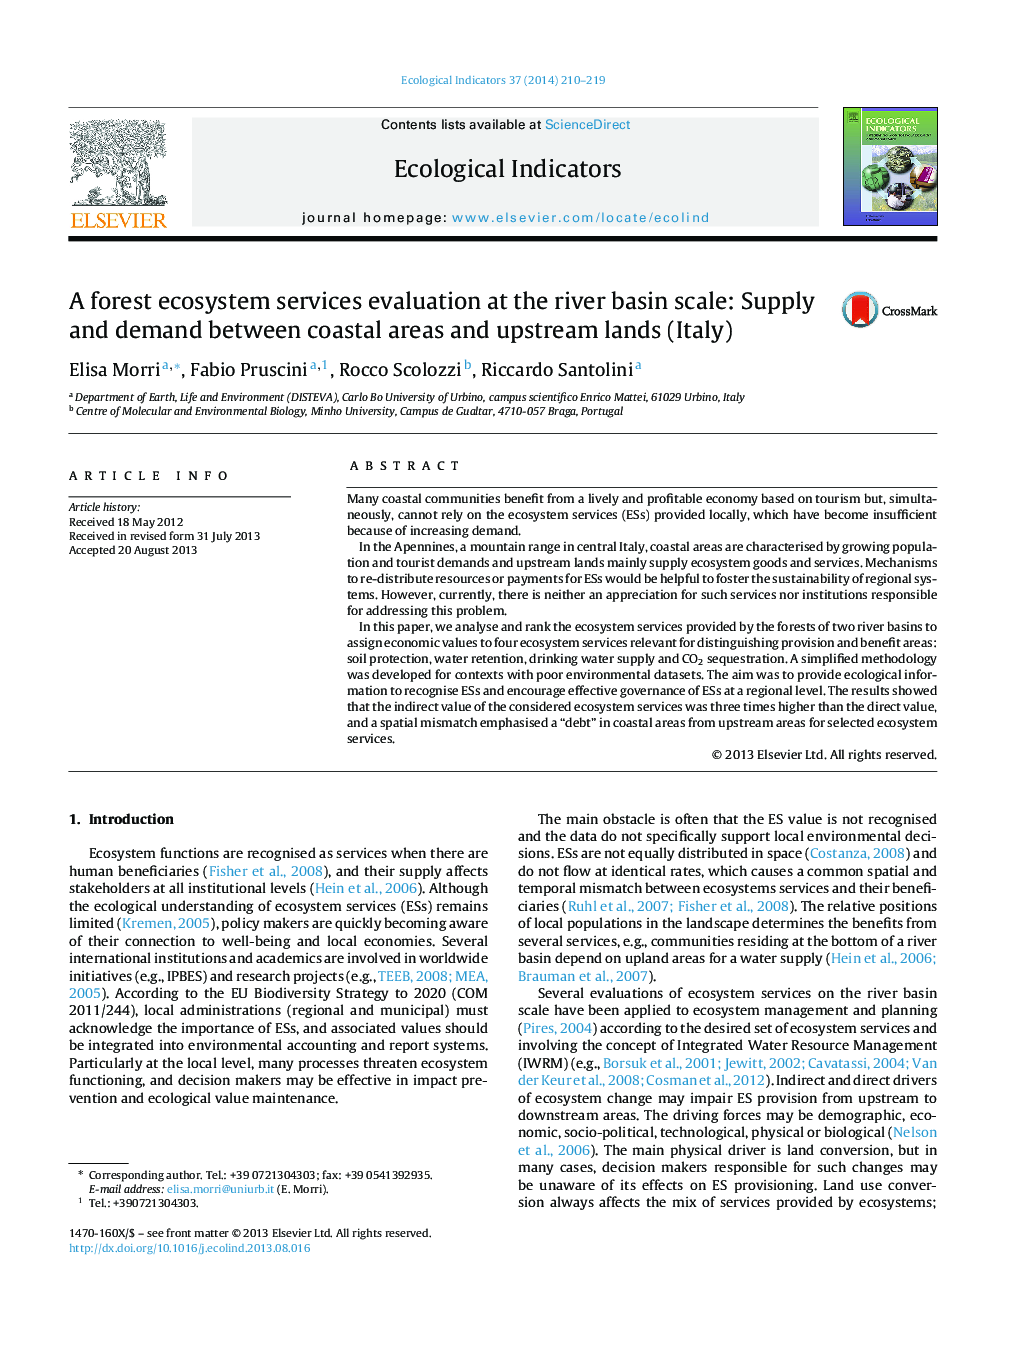 A forest ecosystem services evaluation at the river basin scale: Supply and demand between coastal areas and upstream lands (Italy)